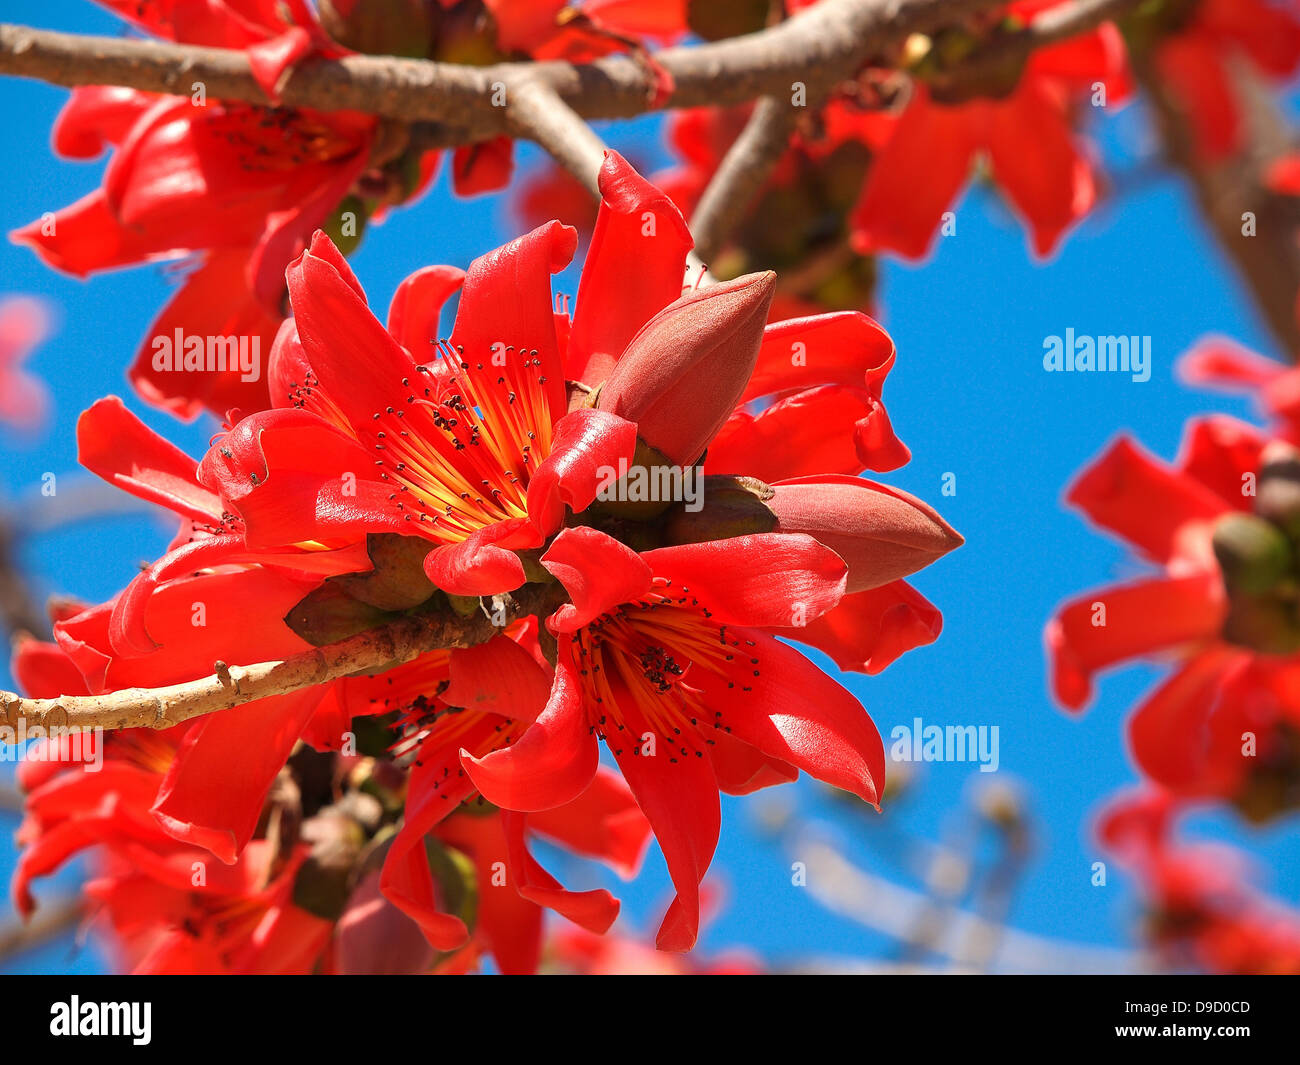 Blossoms of the Red Silk Cotton Tree Stock Photo